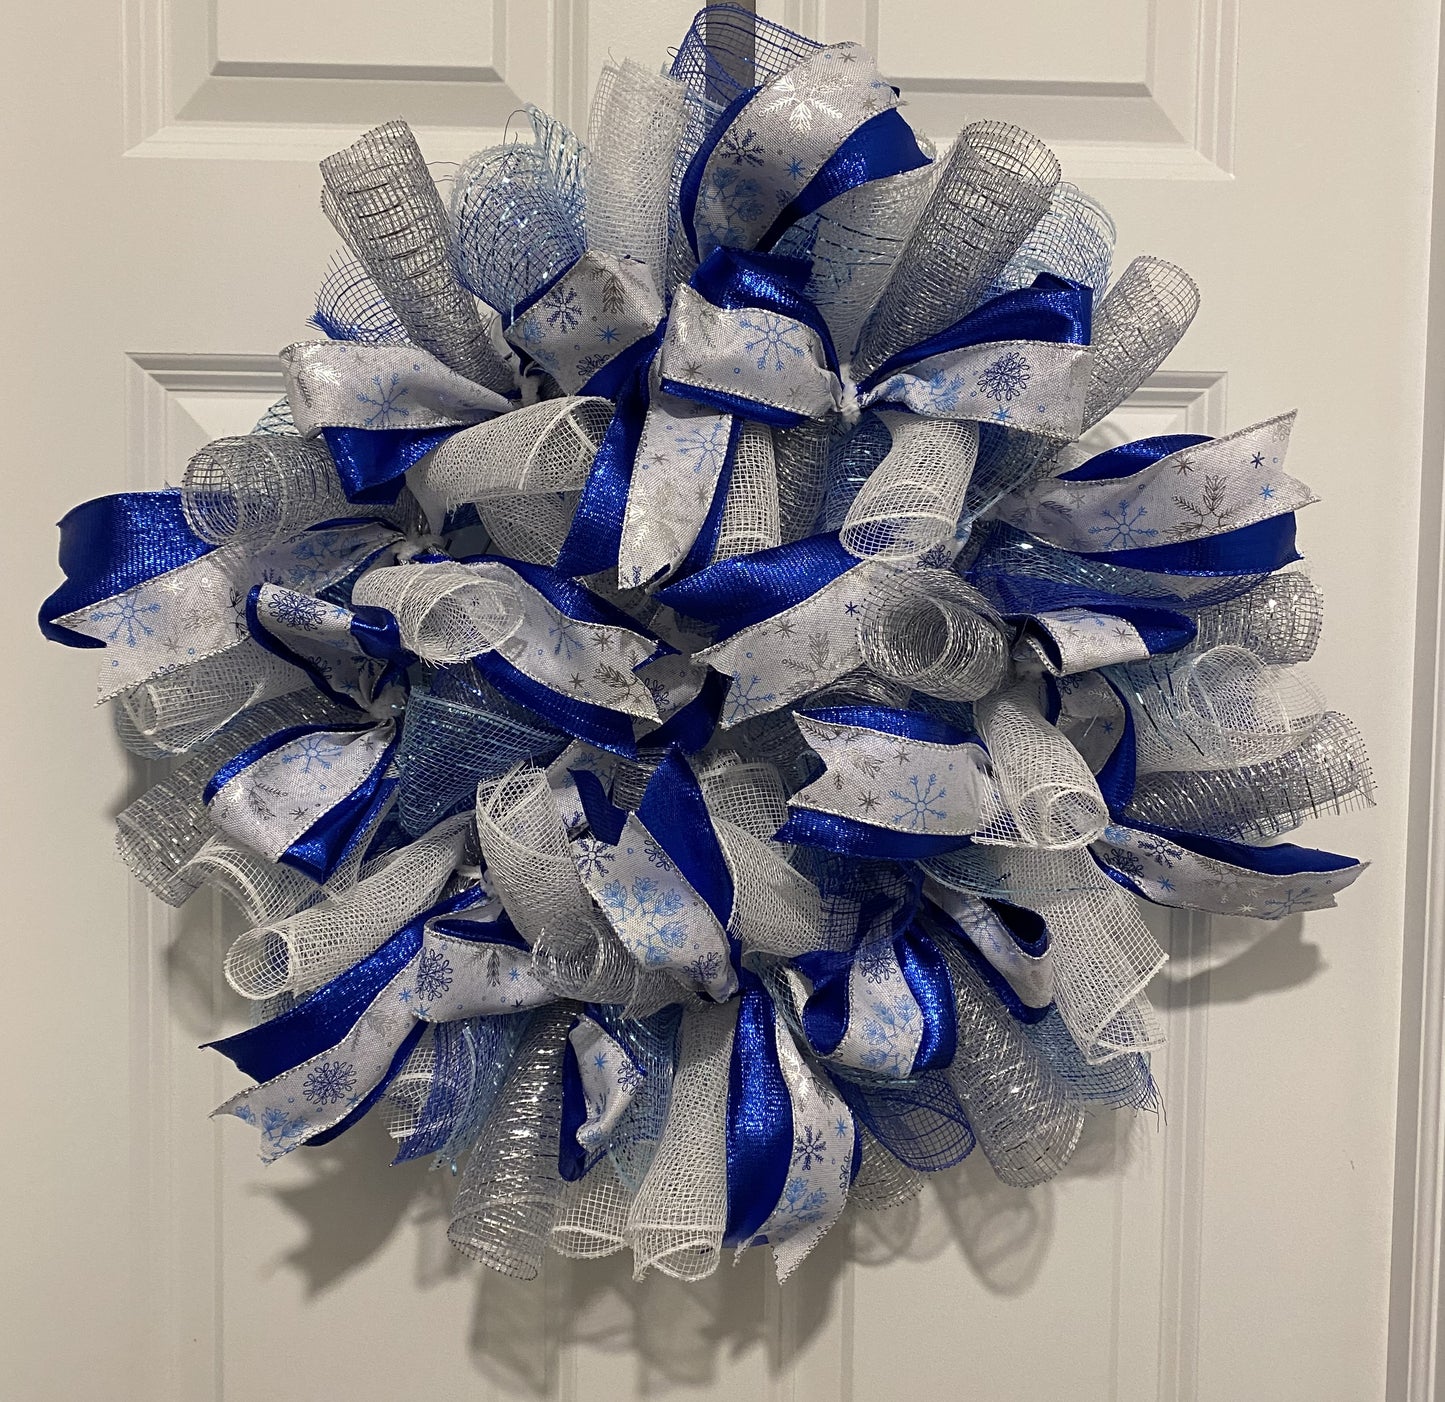 Blue and silver Christmas wreath - 14"